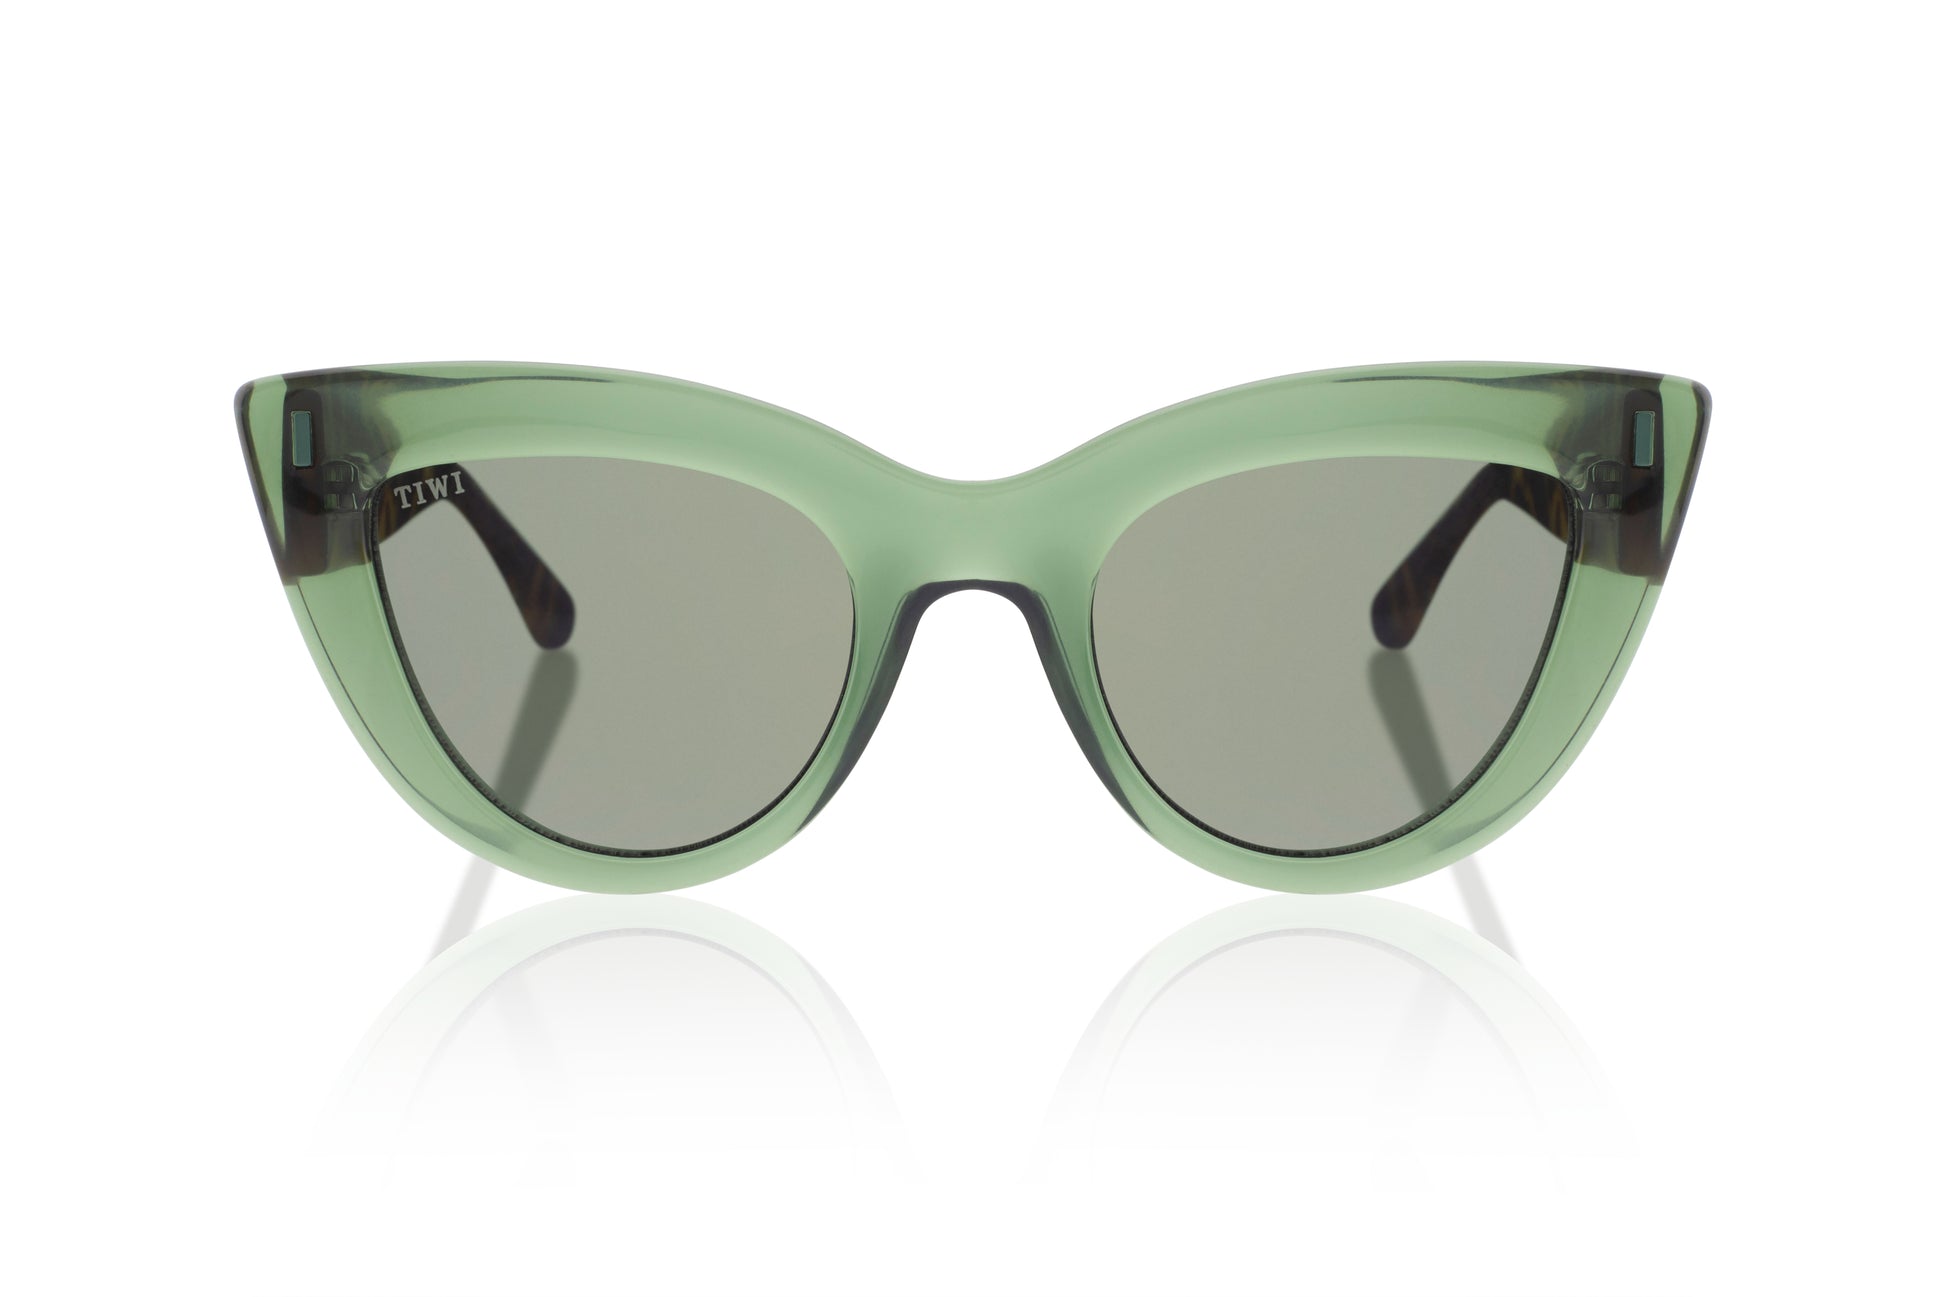 YUNON  Available in more colors Shiny Gren Tortoise Temples  